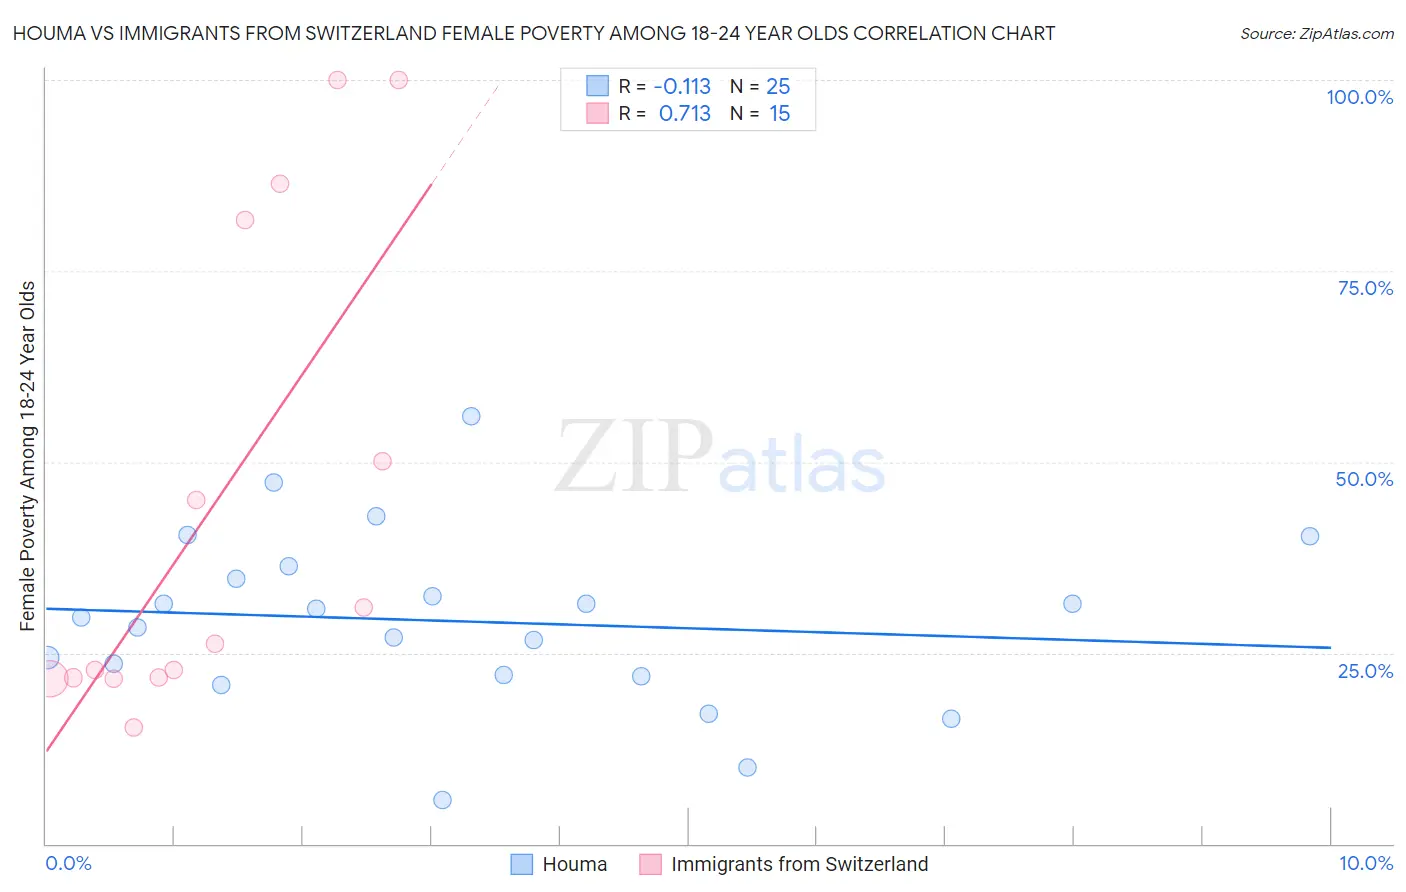 Houma vs Immigrants from Switzerland Female Poverty Among 18-24 Year Olds